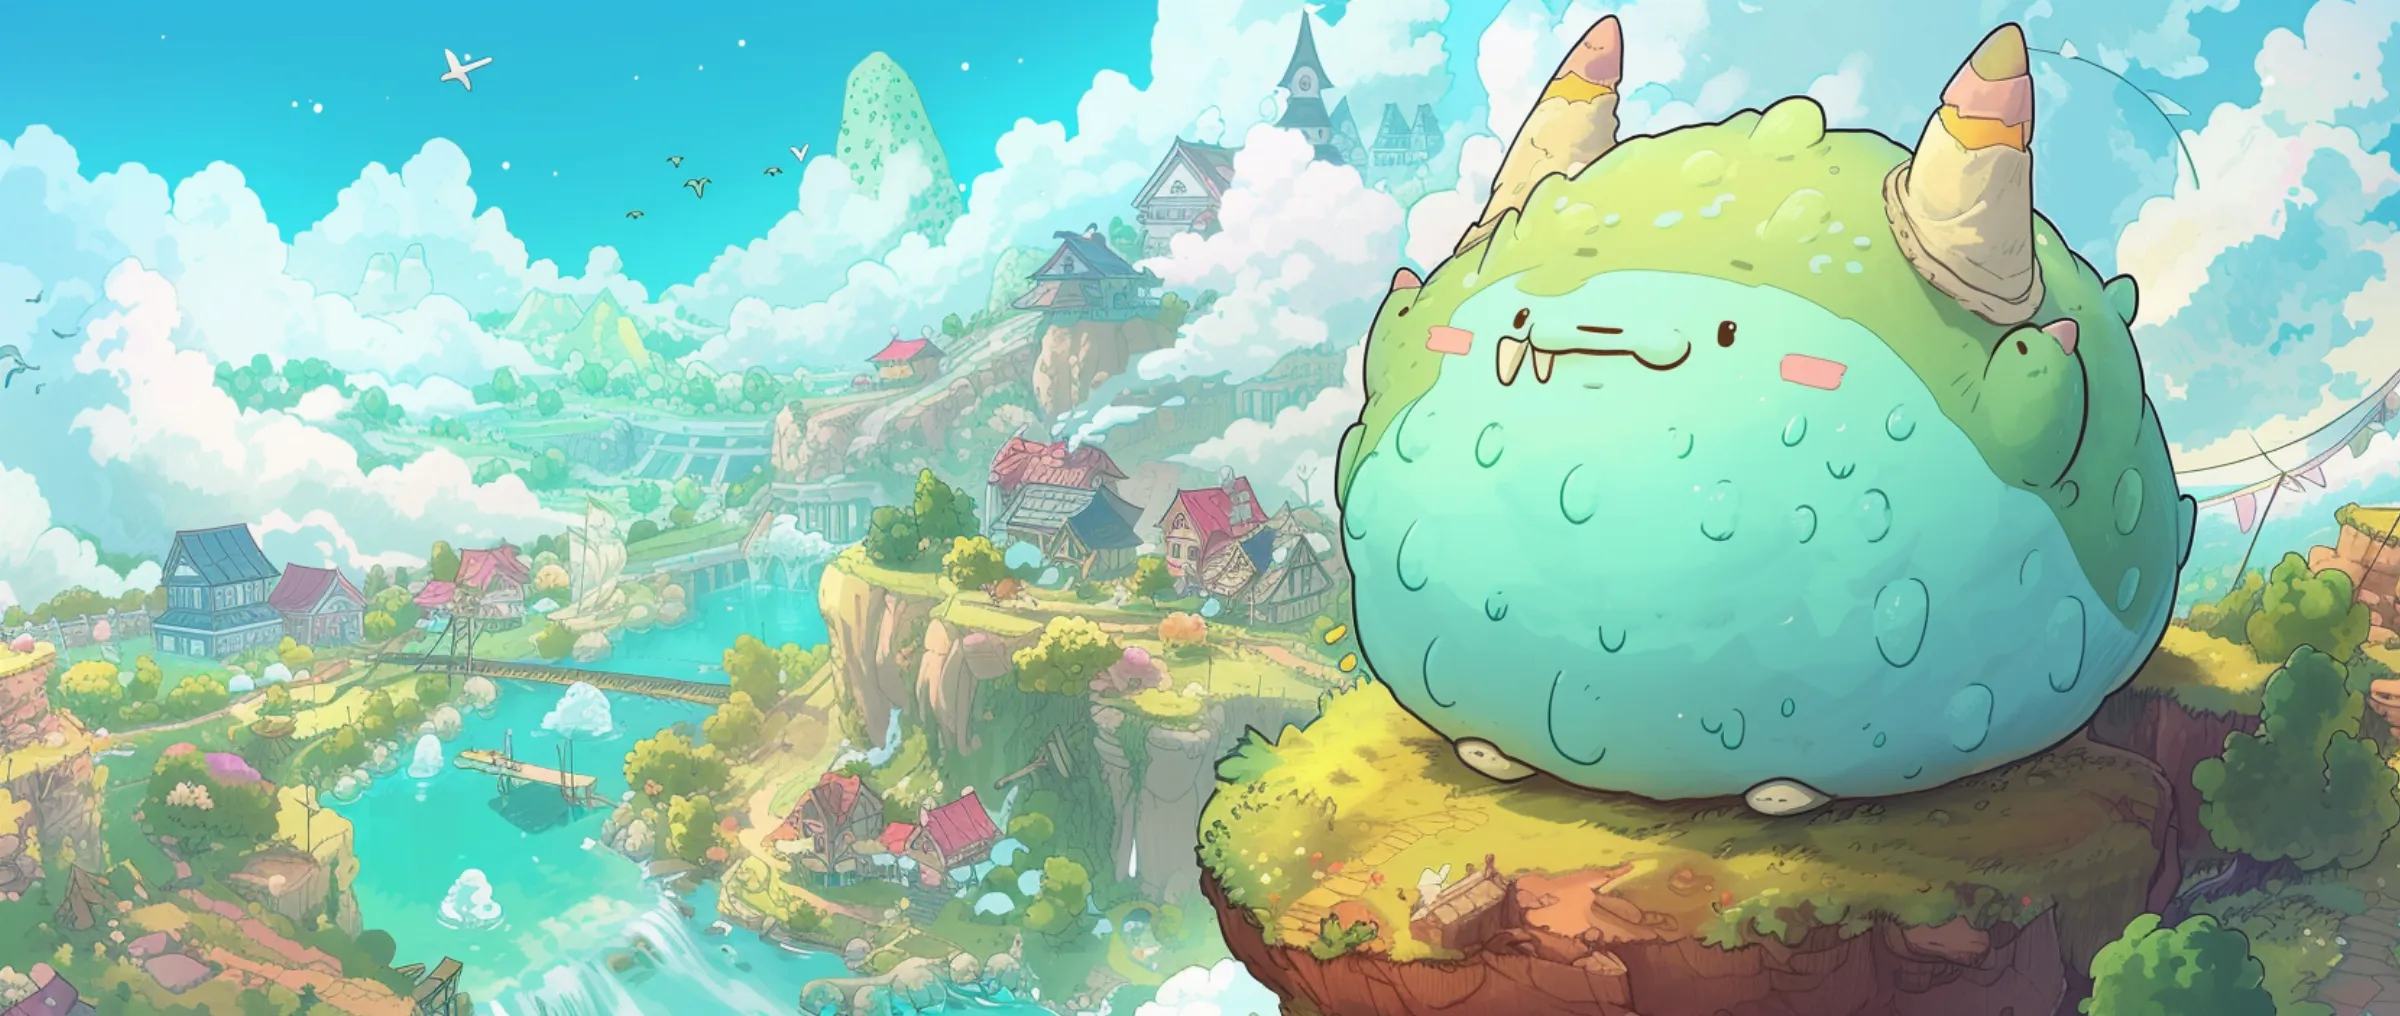 Halting of Land Staking in Axie Infinity Overshadows the Launch of Homeland Open Beta Testing